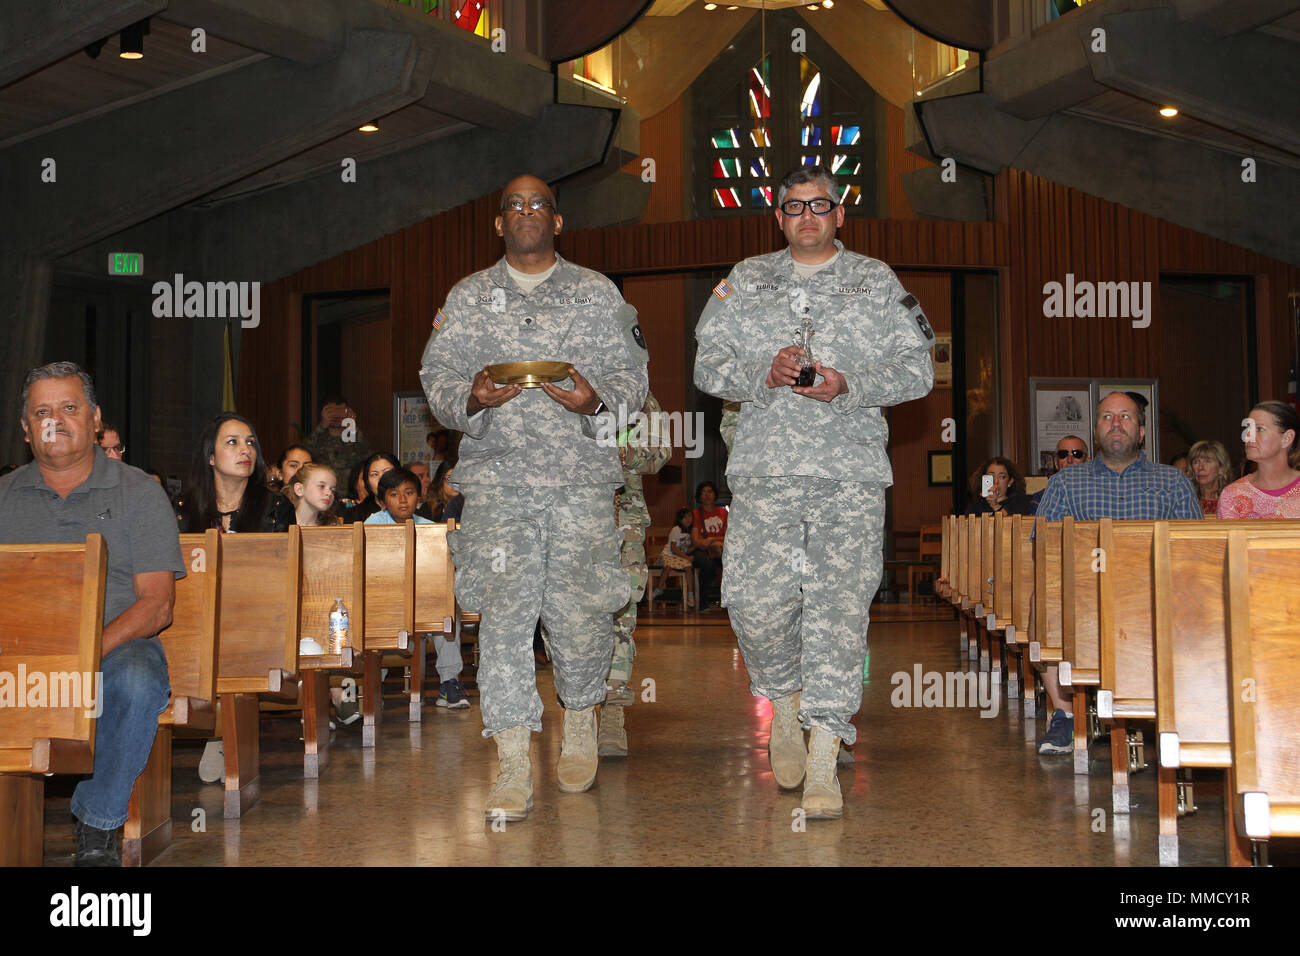 Spc. Donald Logan, left, and Spc. Jesus Flores of the California Army National Guard bring the communion offering forward during an Oct. 15 special Catholic mass to honor CalGuard Soldiers who are helping law enforcement deal with the Northern California wildfires. Representatives from the 185th Military Police Battalion, 49th Military Police Brigade, attended the service at Saint John the Baptist Church, Napa, California. (Army National Guard photo by Staff Sgt. Eddie Siguenza) Stock Photo